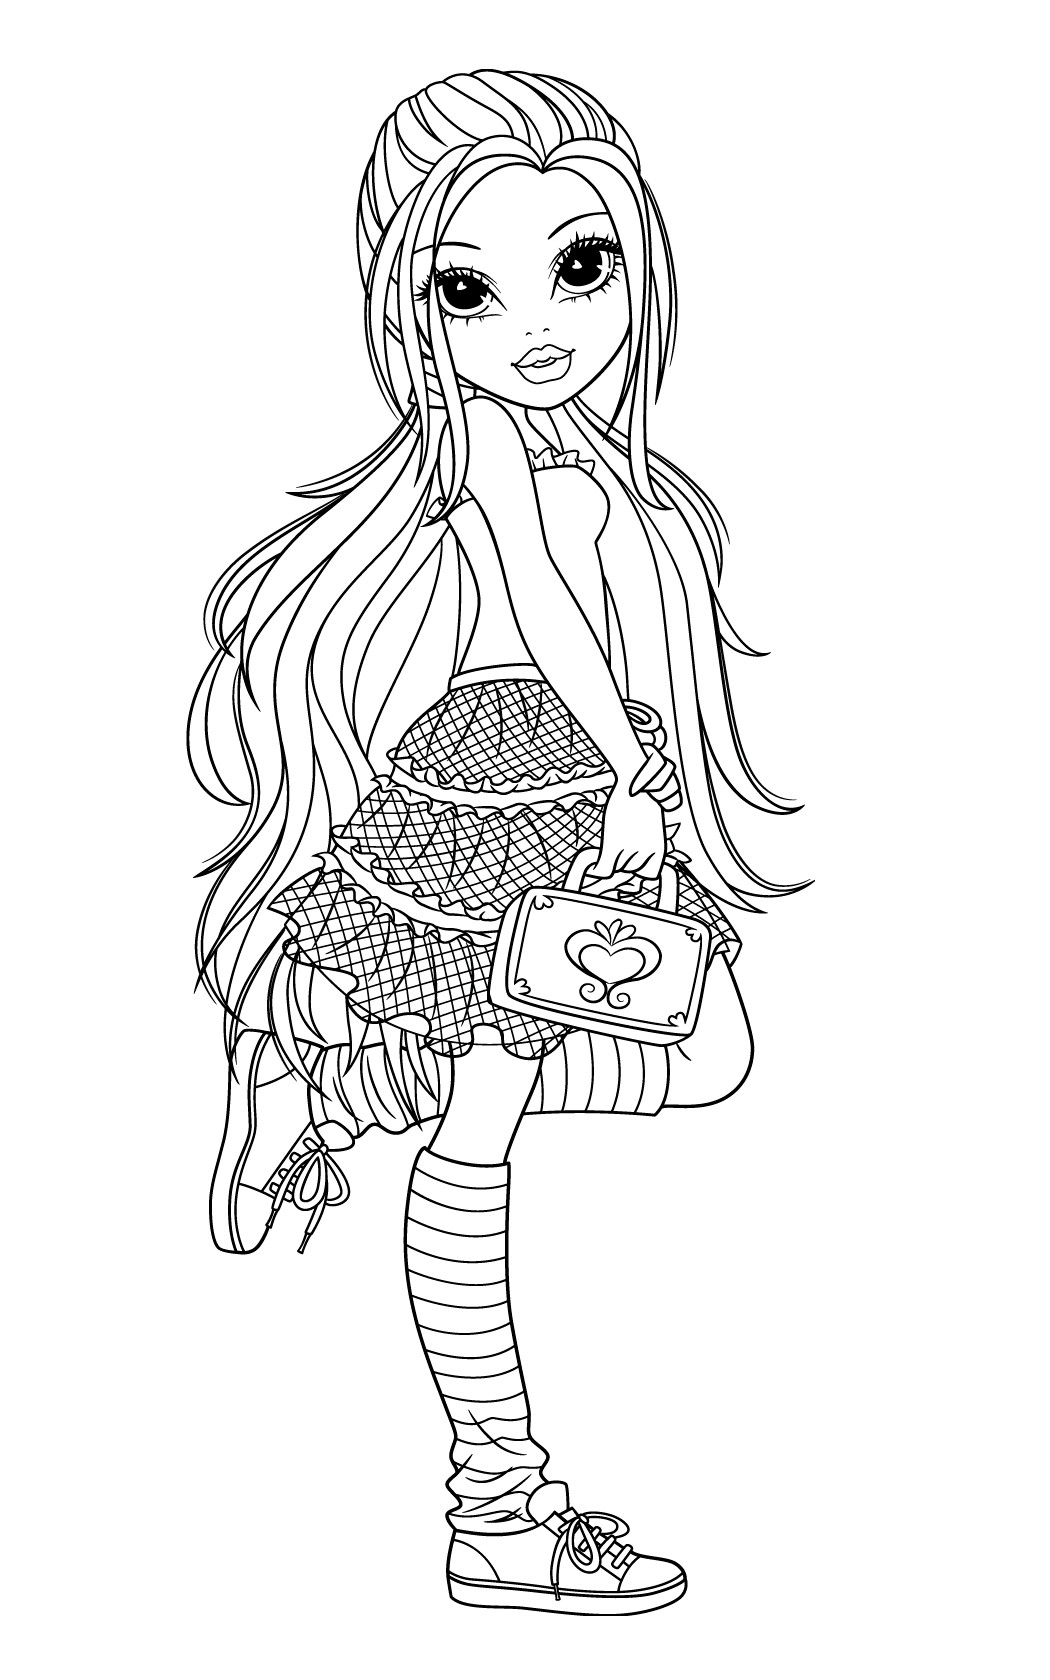 Girls Coloring Sheets
 New Moxie Girlz Coloring Pages will be added frequently so